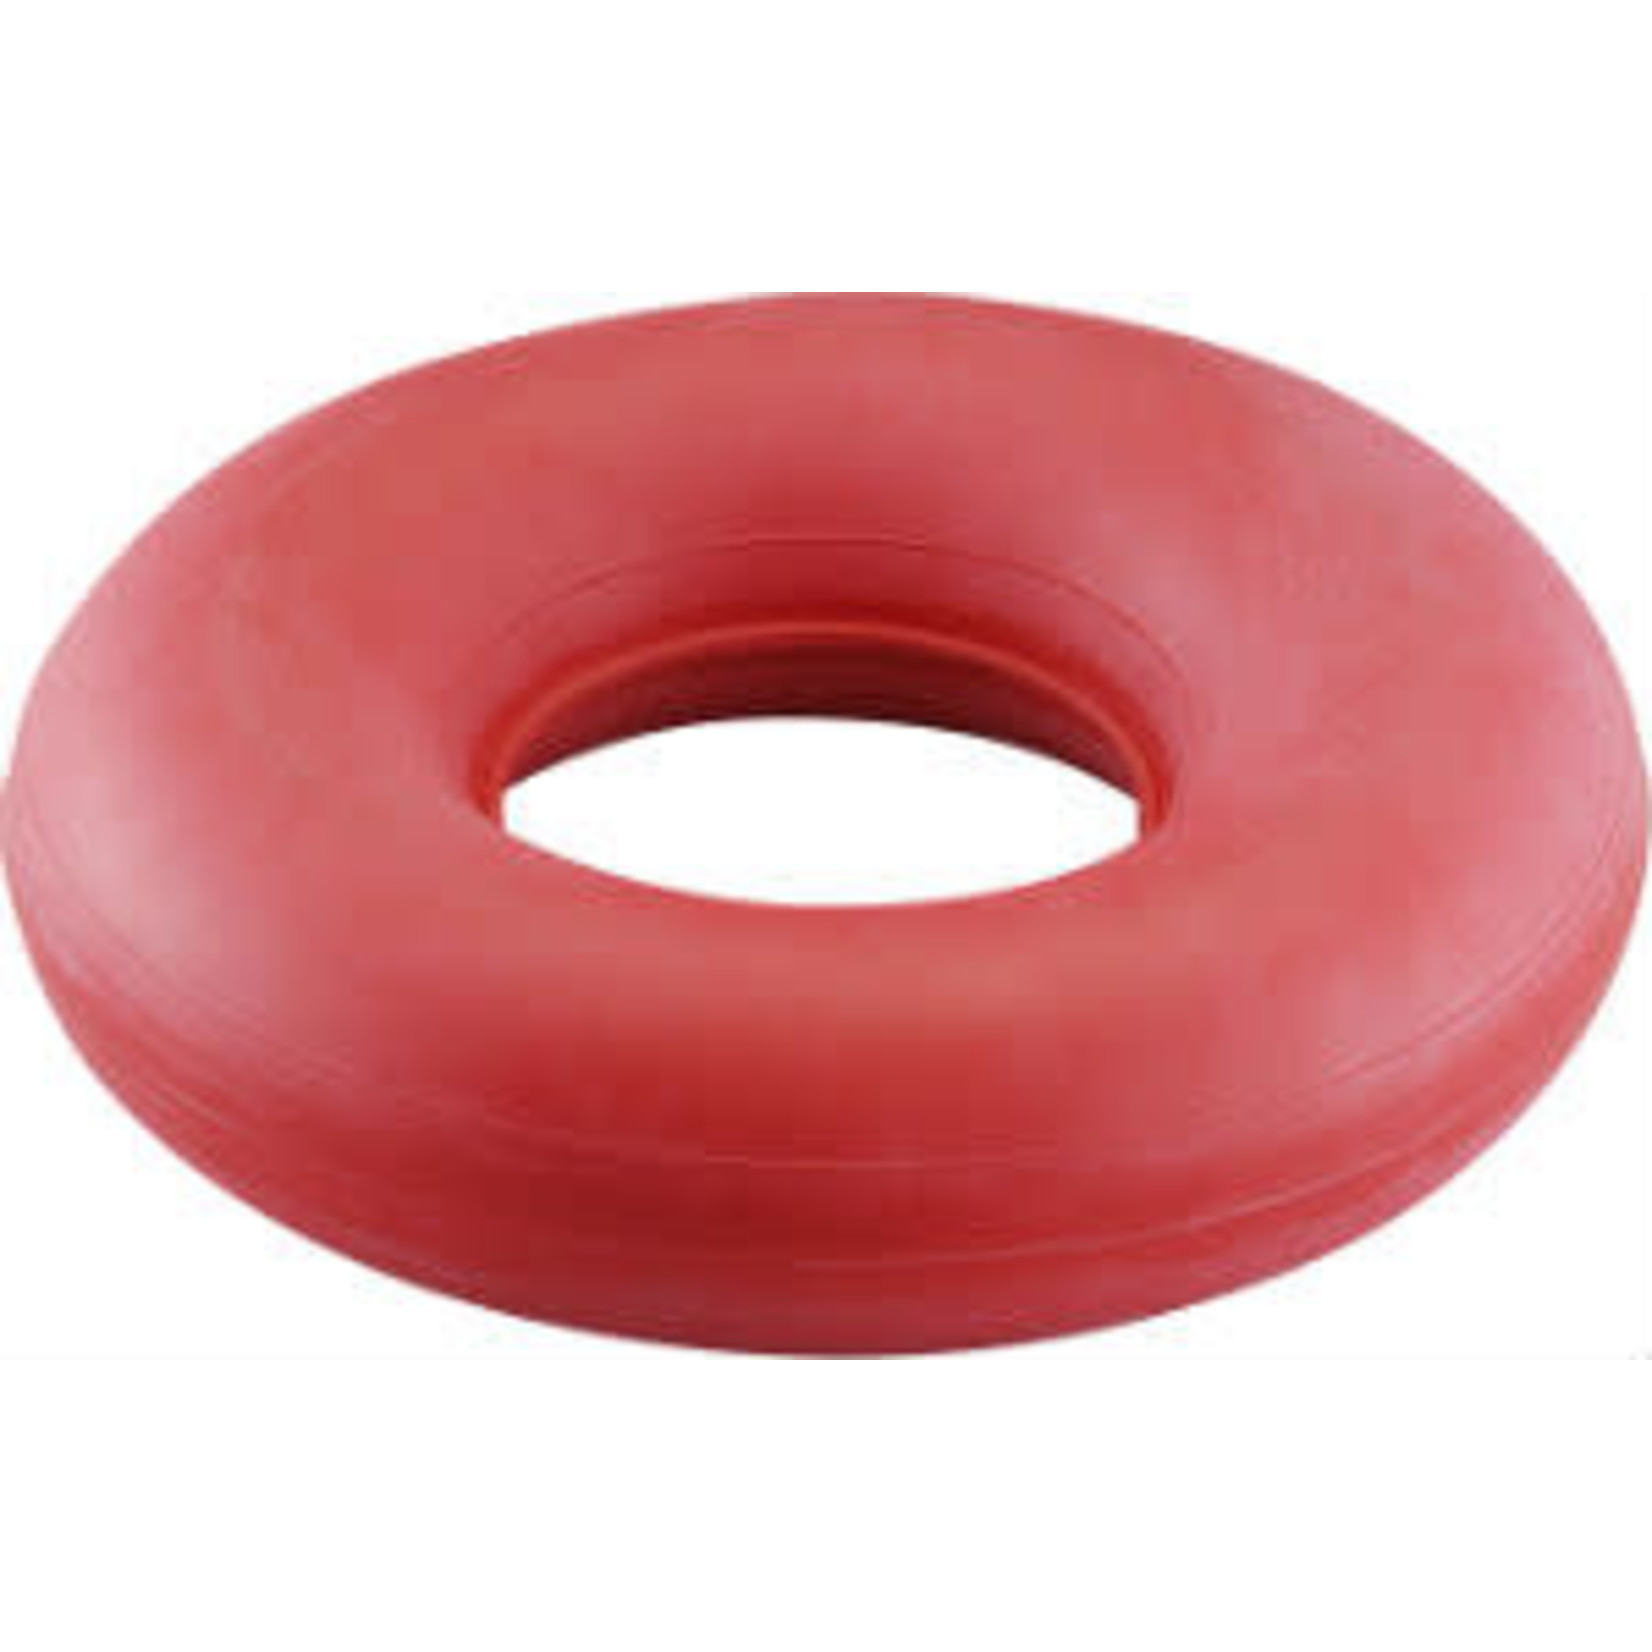 RUBBER CUSHION INFLATABLE 18"